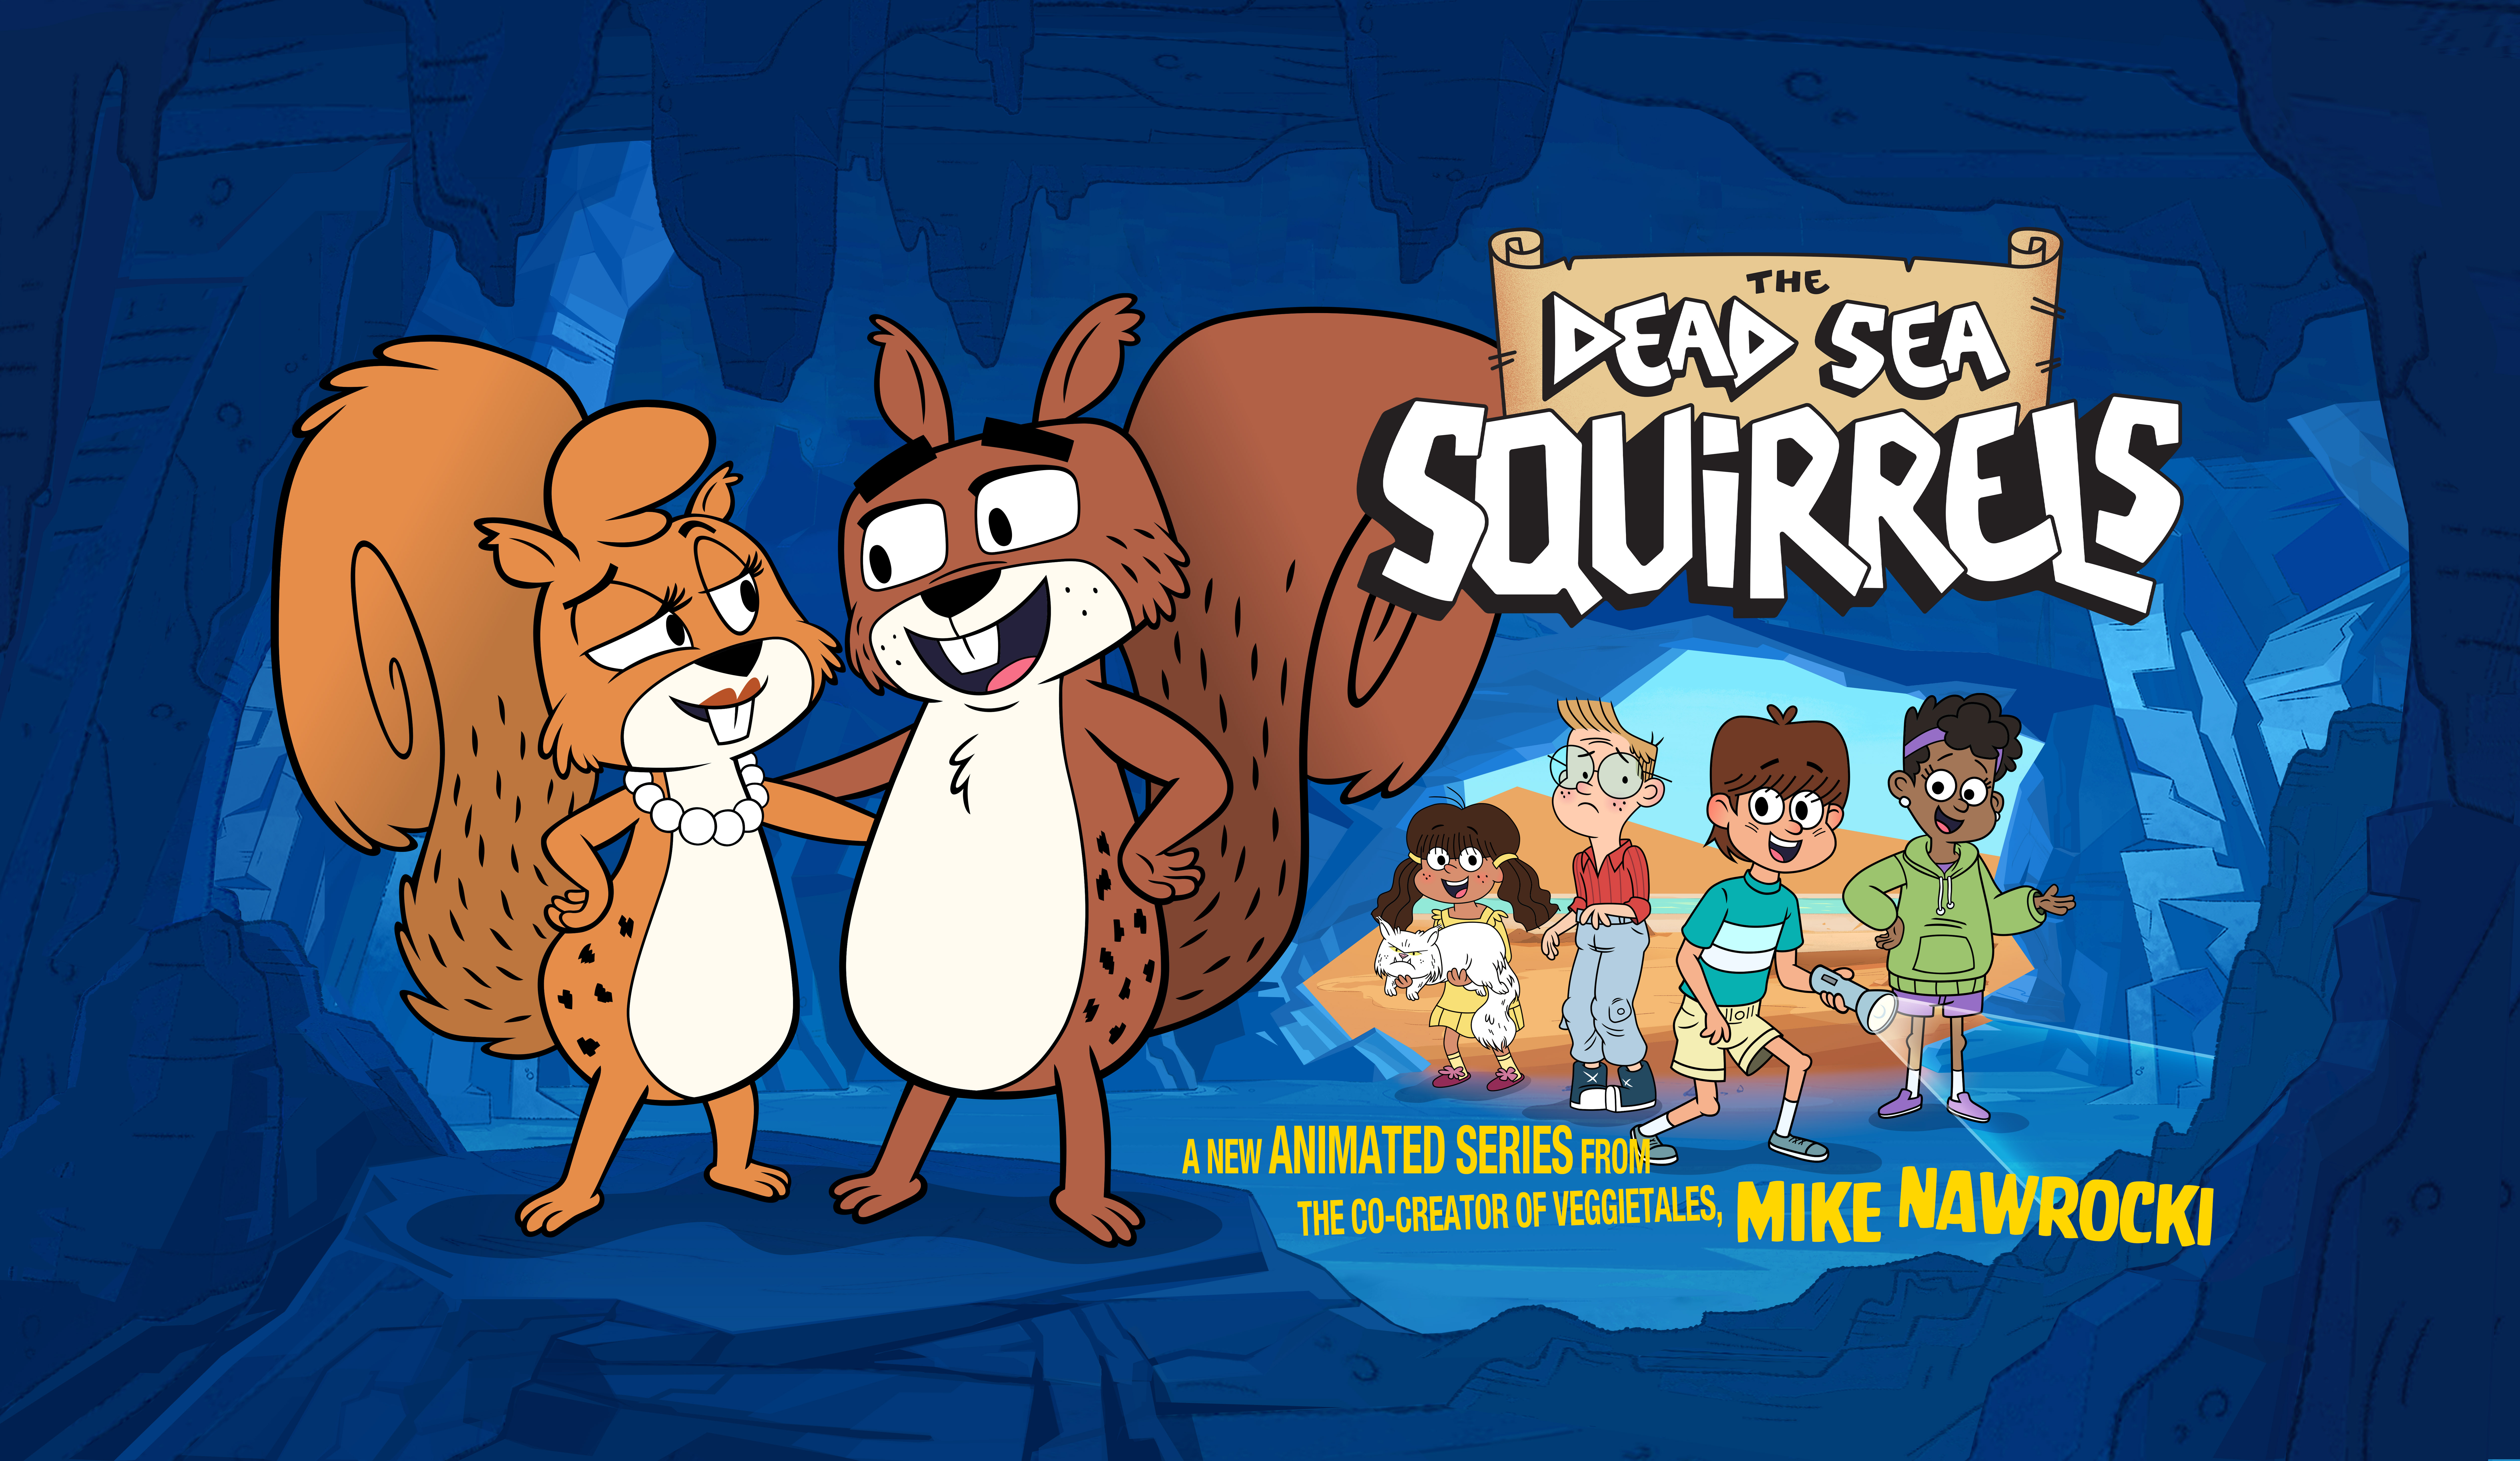 The Dead Sea Squirrels: Coming Soon to a Screen Near You!